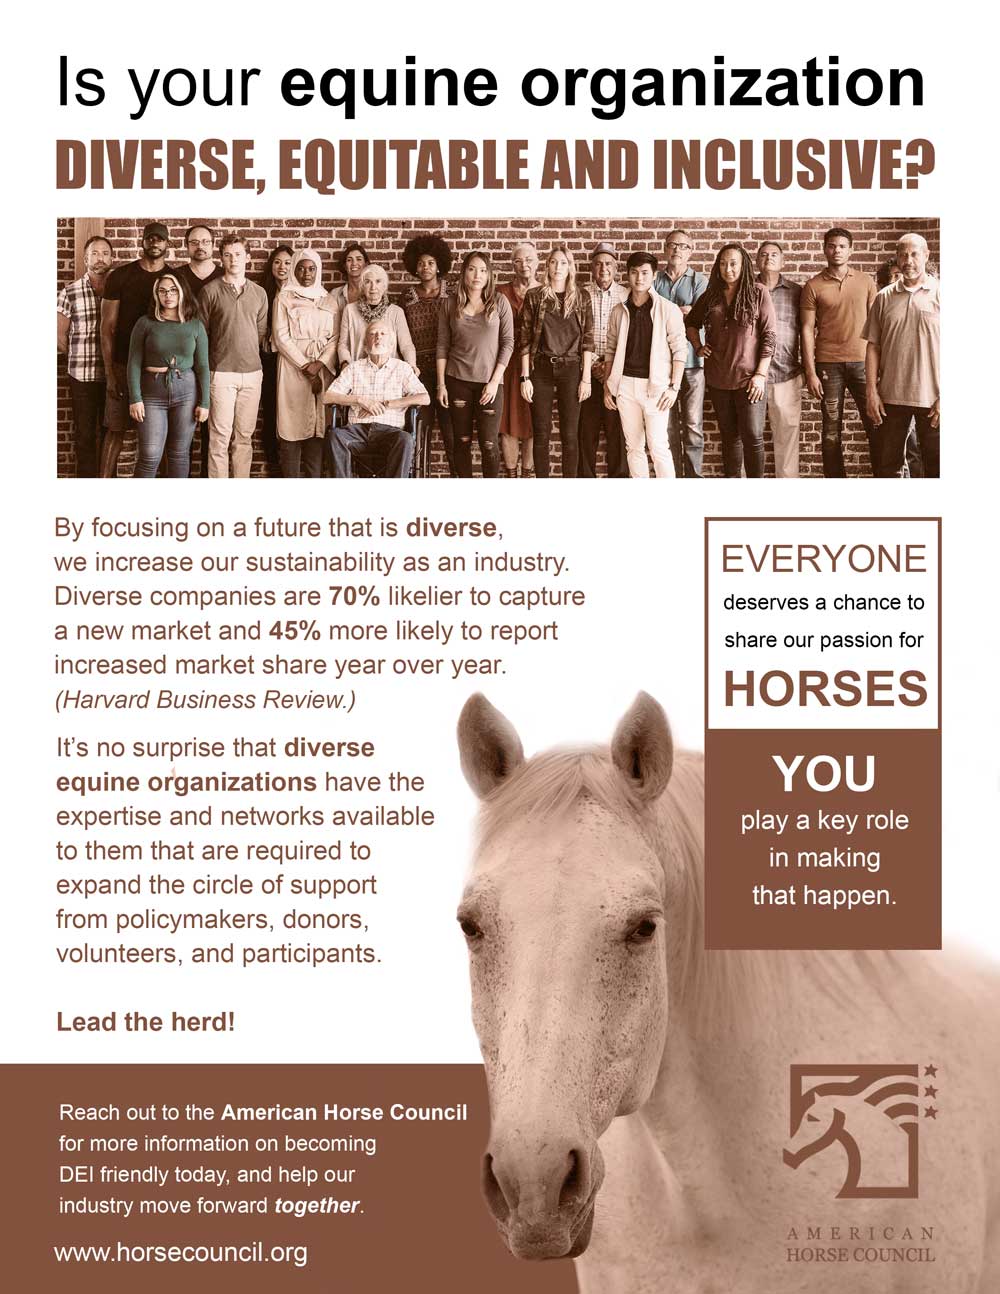 Diversity, Equity, Inclusion Task Force Image